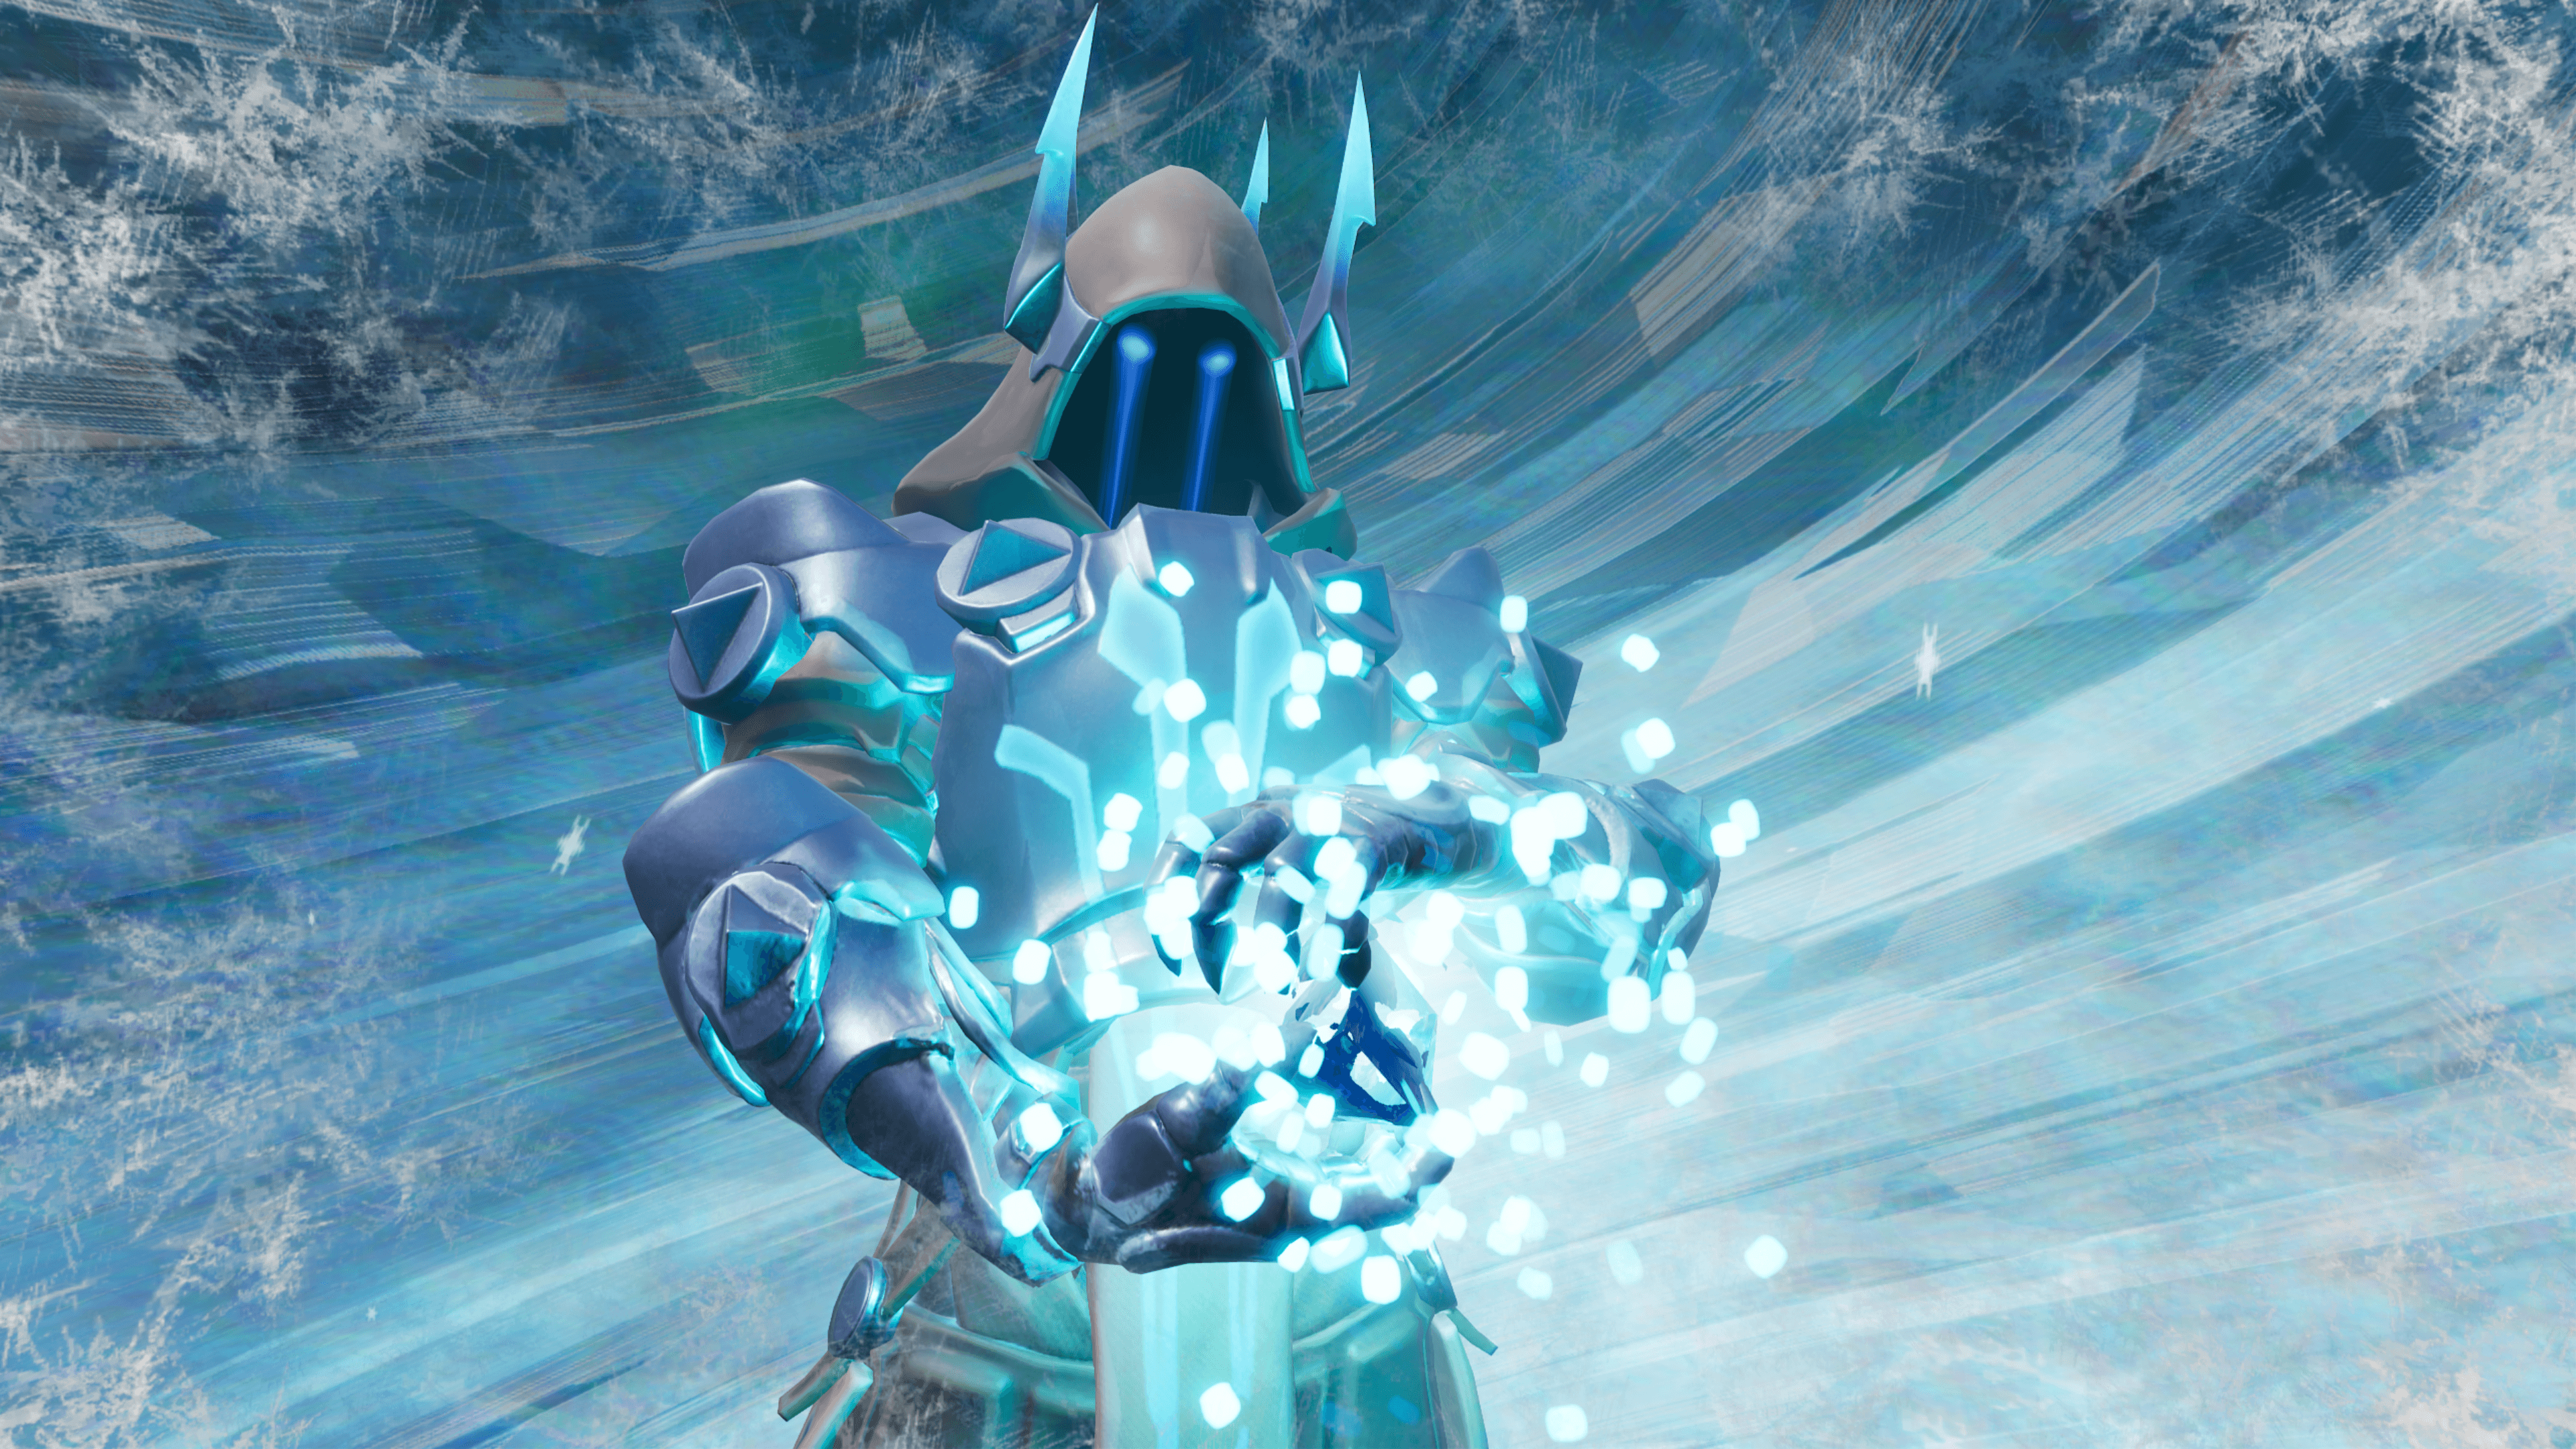 Fortnite. The Ice King 4k Ultra HD Wallpaper. Background Image